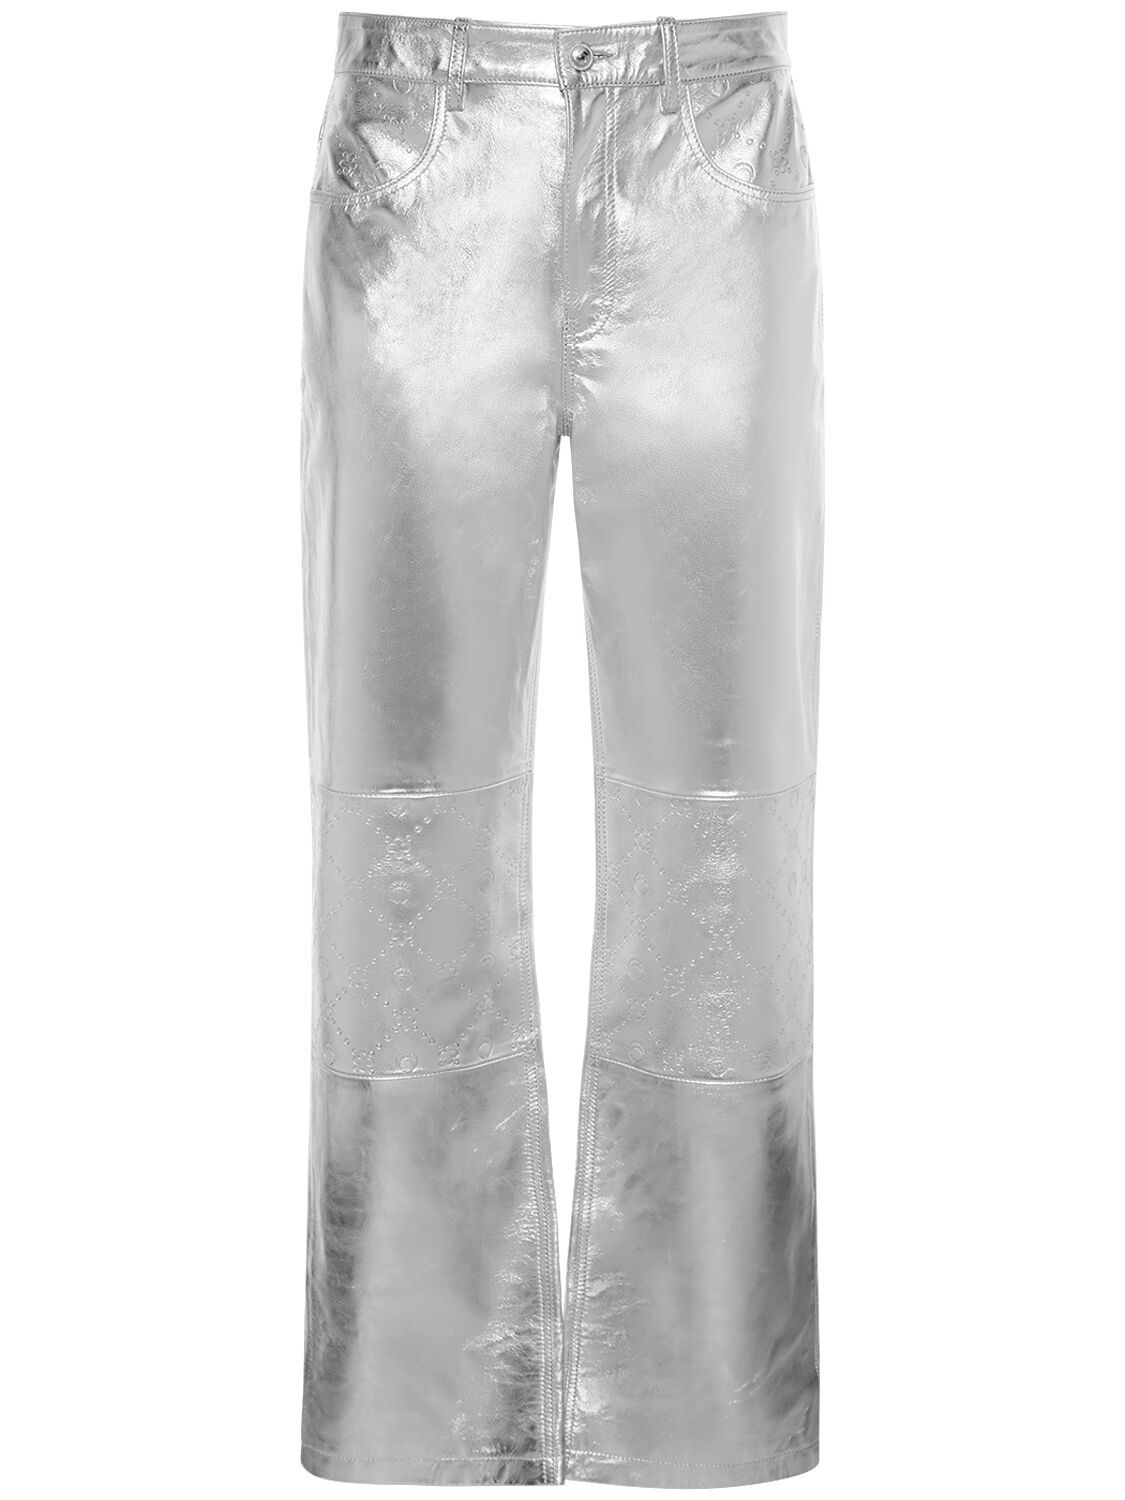 Marine Serre Crescent Moon-debossed Leather Trousers In Silver